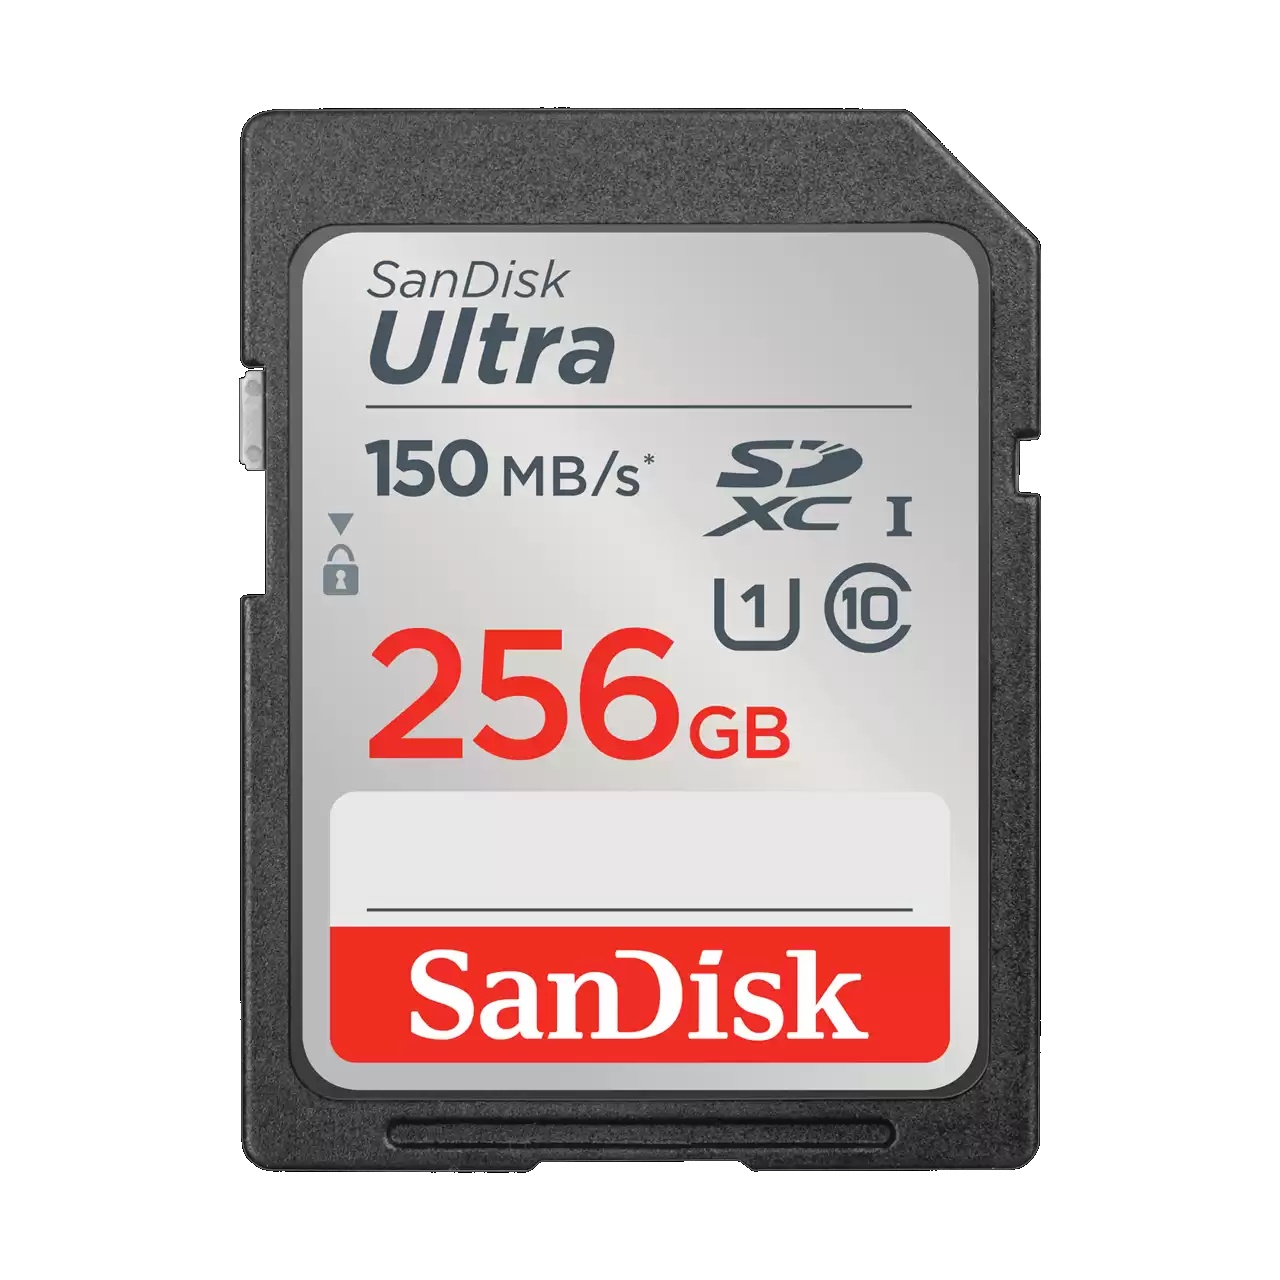 Storage - M.2 NVME/Sandisk: SanDisk, Ultra, 256GB, SDHC, SDXC, UHS-I, Memory, Card, 150MB/s, Full, HD, Class, 10, Speed, Shock, Proof, Temperature, Proof, Water, Proof, 